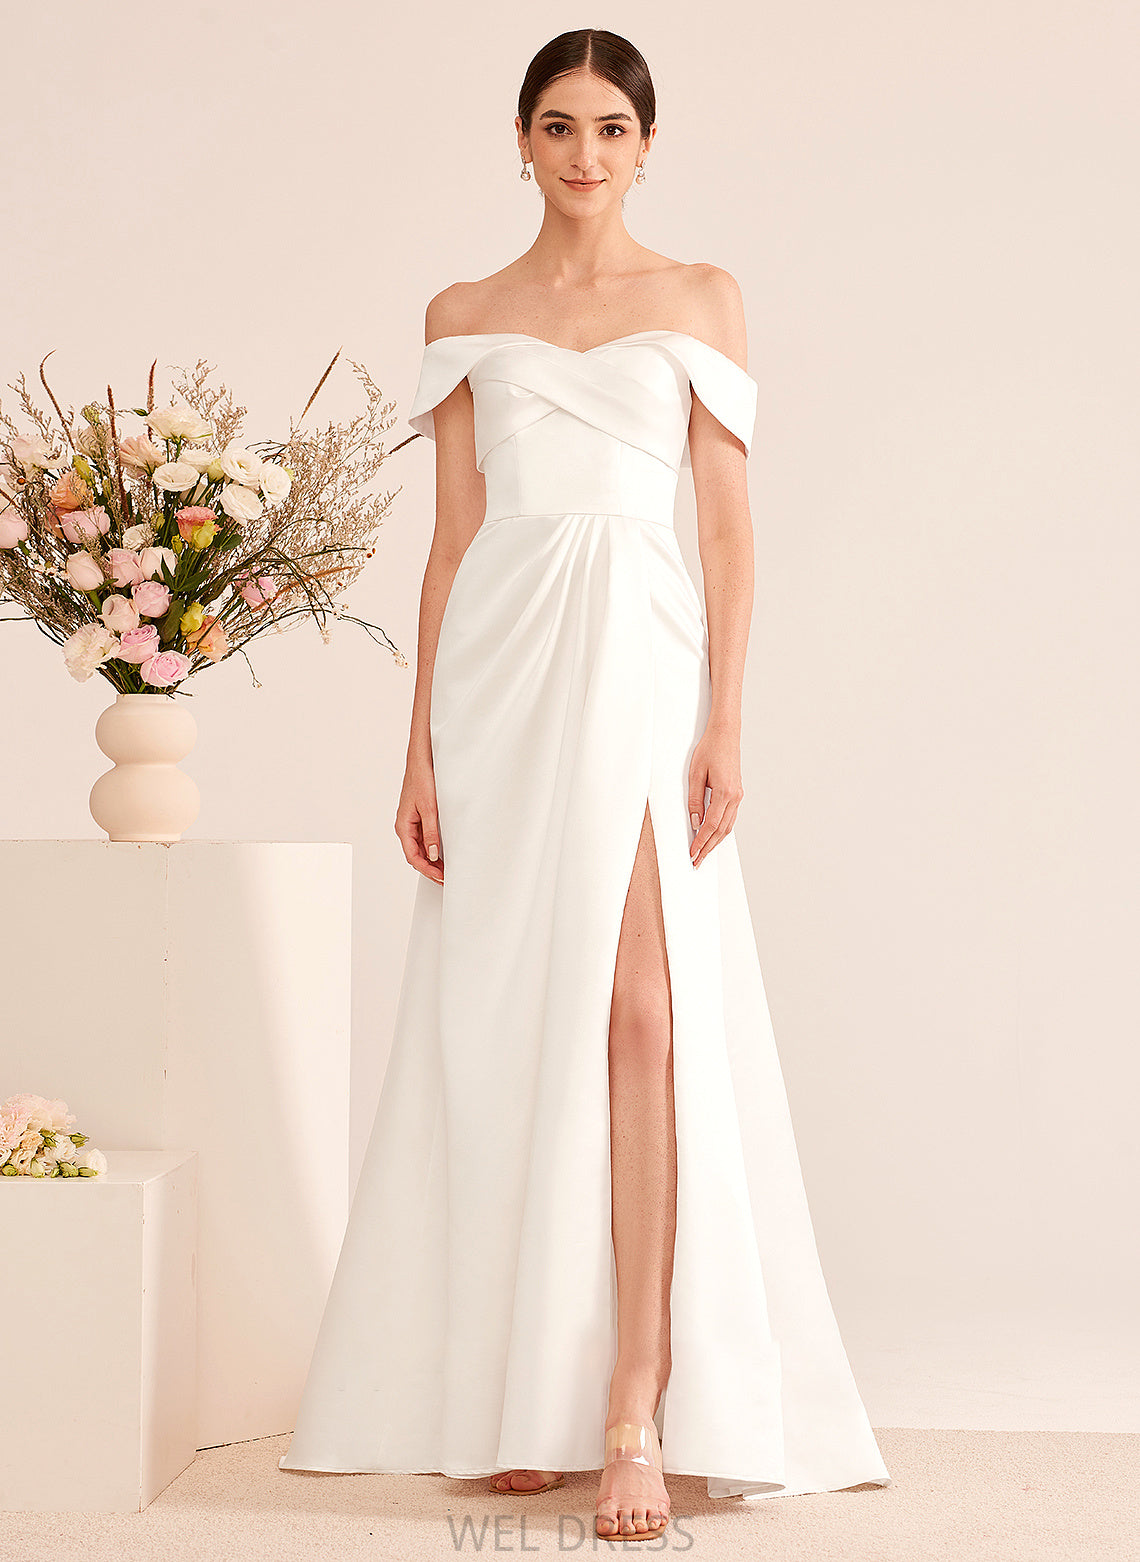 Wedding Dresses A-Line Front Dress Train Tanya Ruffle With Off-the-Shoulder Split Wedding Sweep